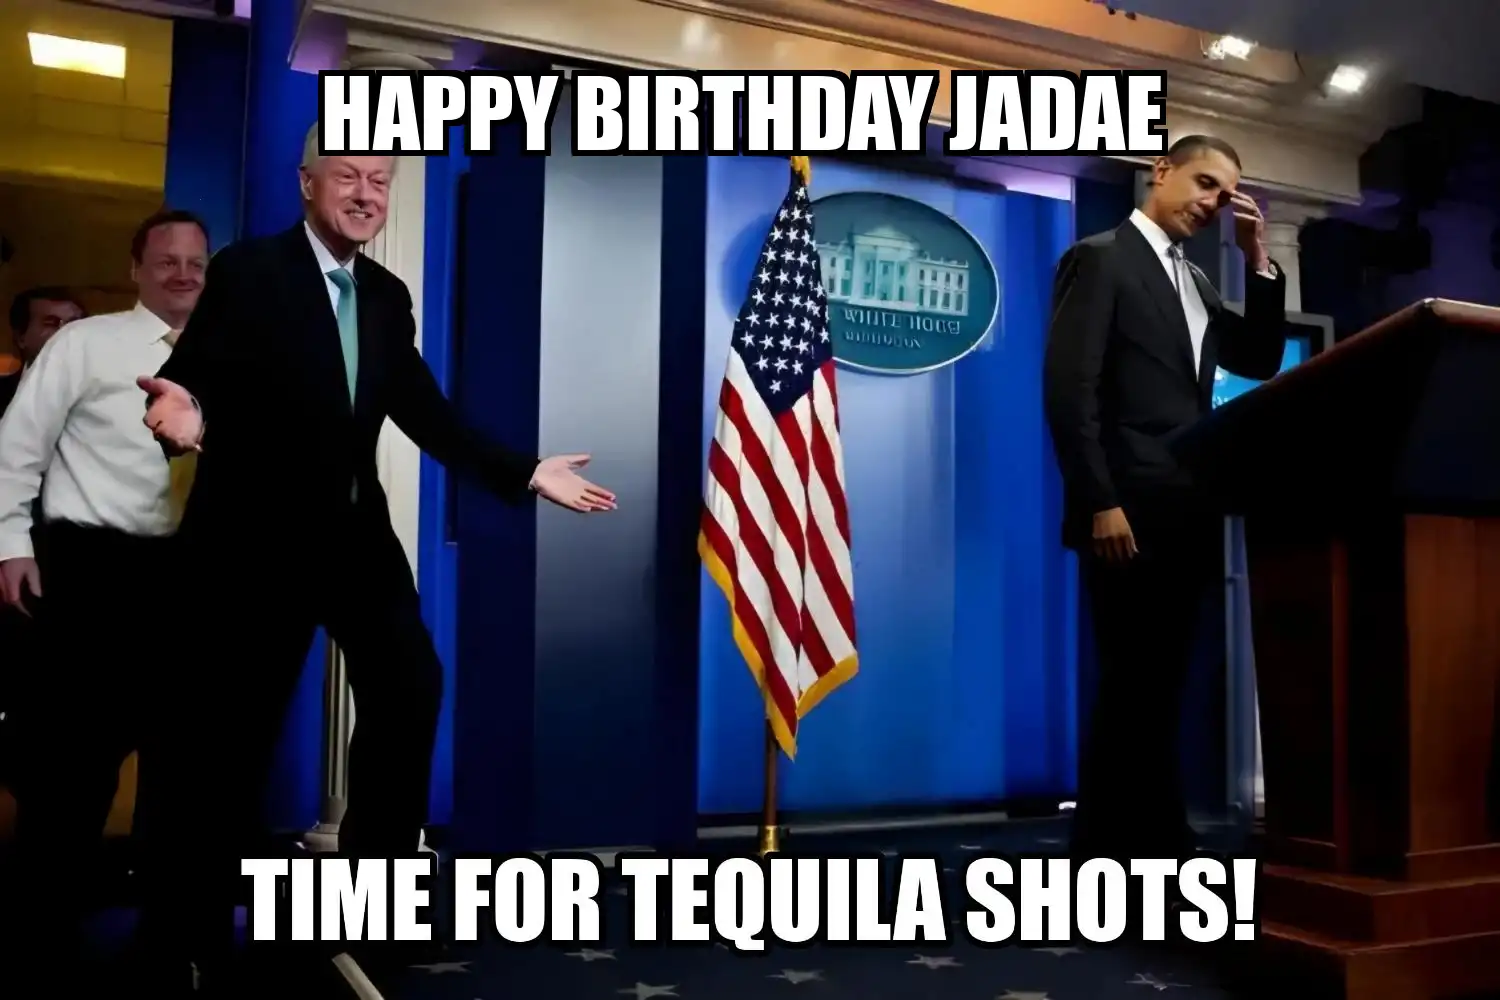 Happy Birthday Jadae Time For Tequila Shots Memes